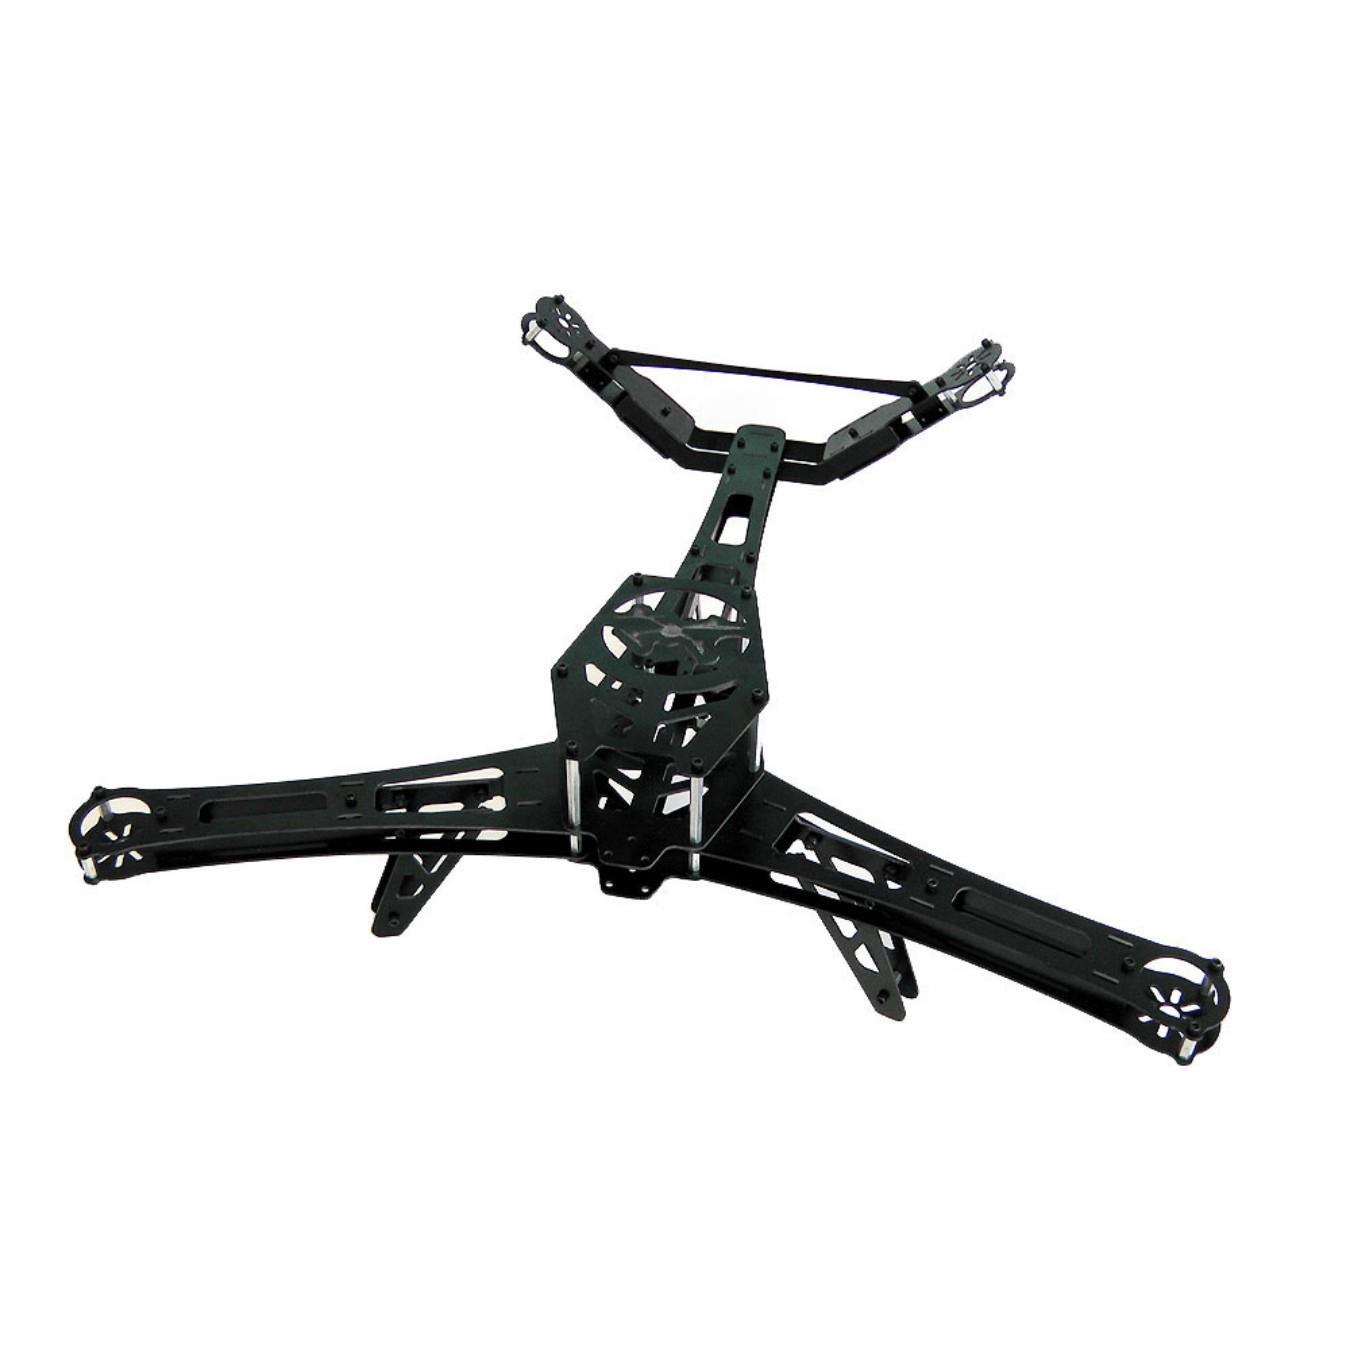 Lynxmotion Hunter VTail 500 Drone Kit (Hardware Only)- Click to Enlarge